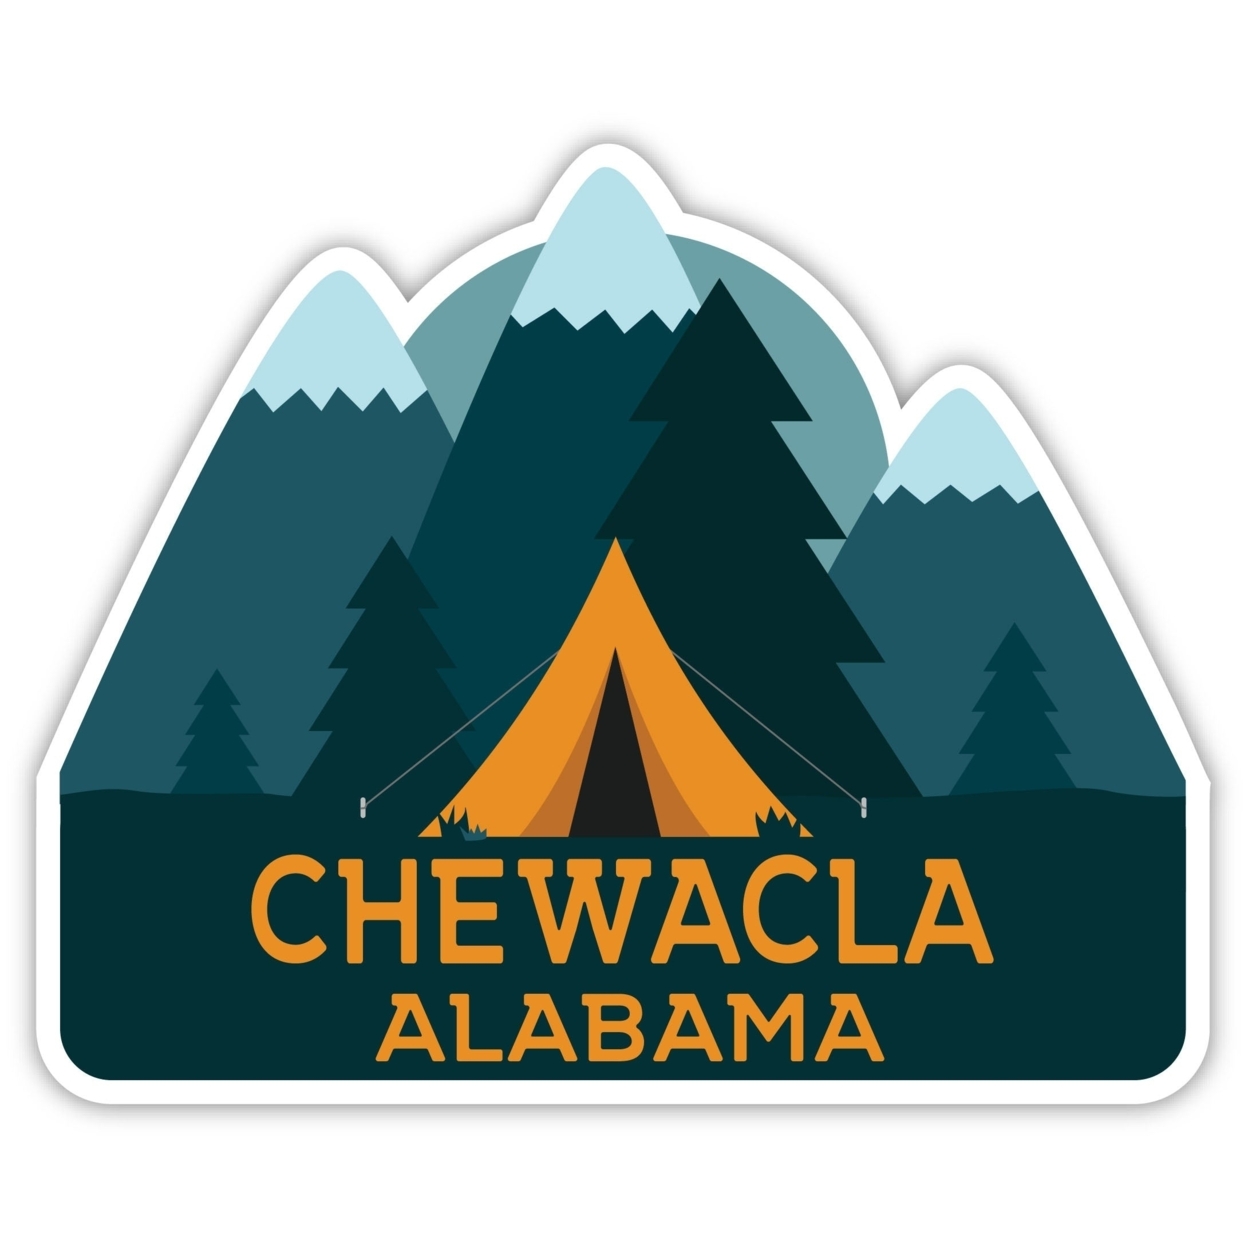 Chewacla Alabama Souvenir Decorative Stickers (Choose Theme And Size) - 4-Pack, 2-Inch, Tent